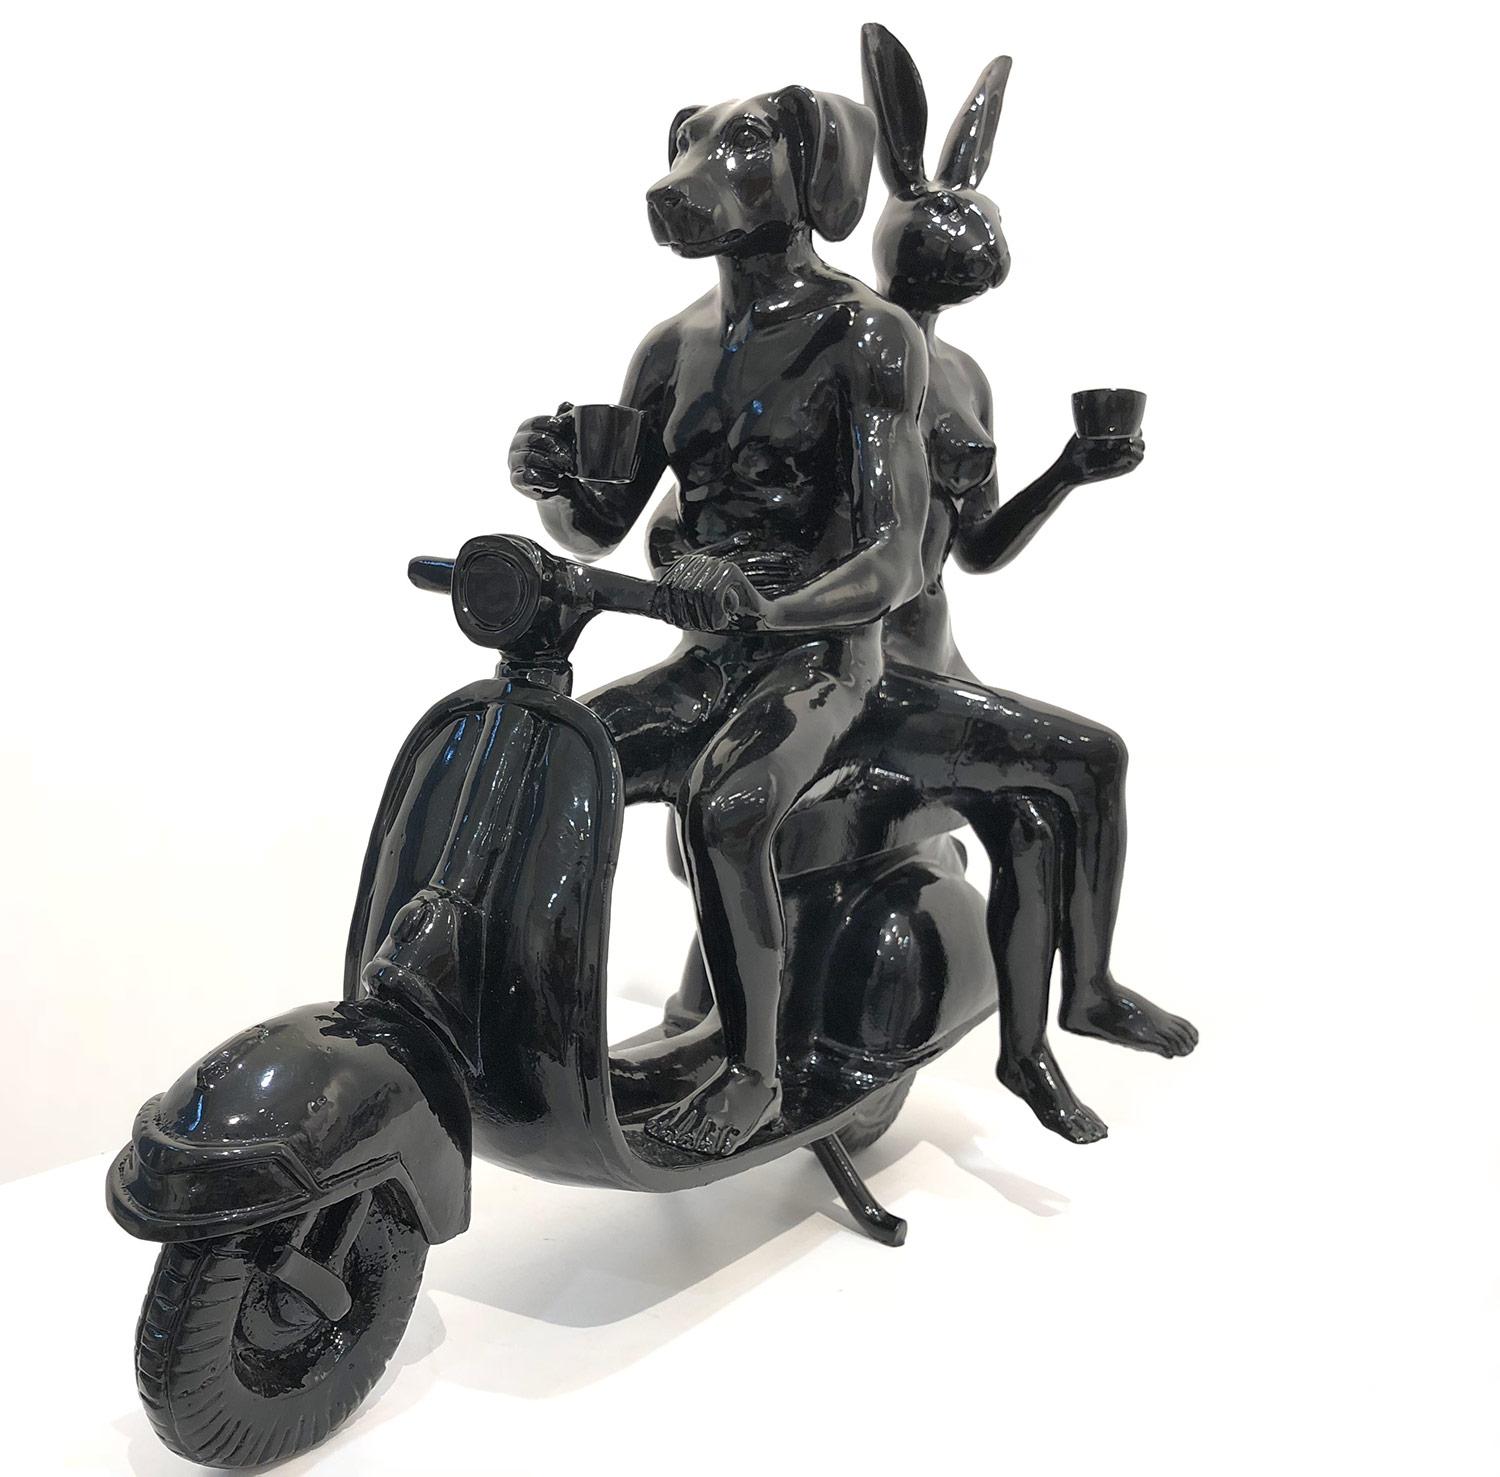 A whimsical yet very strong piece depicting the two figures from Gillie and Marc's iconic figures of the Dog/Bunny Human Hybrid, which has picked up much esteem across the globe. Here we find the figures riding on a Vespa as they embrace drinking